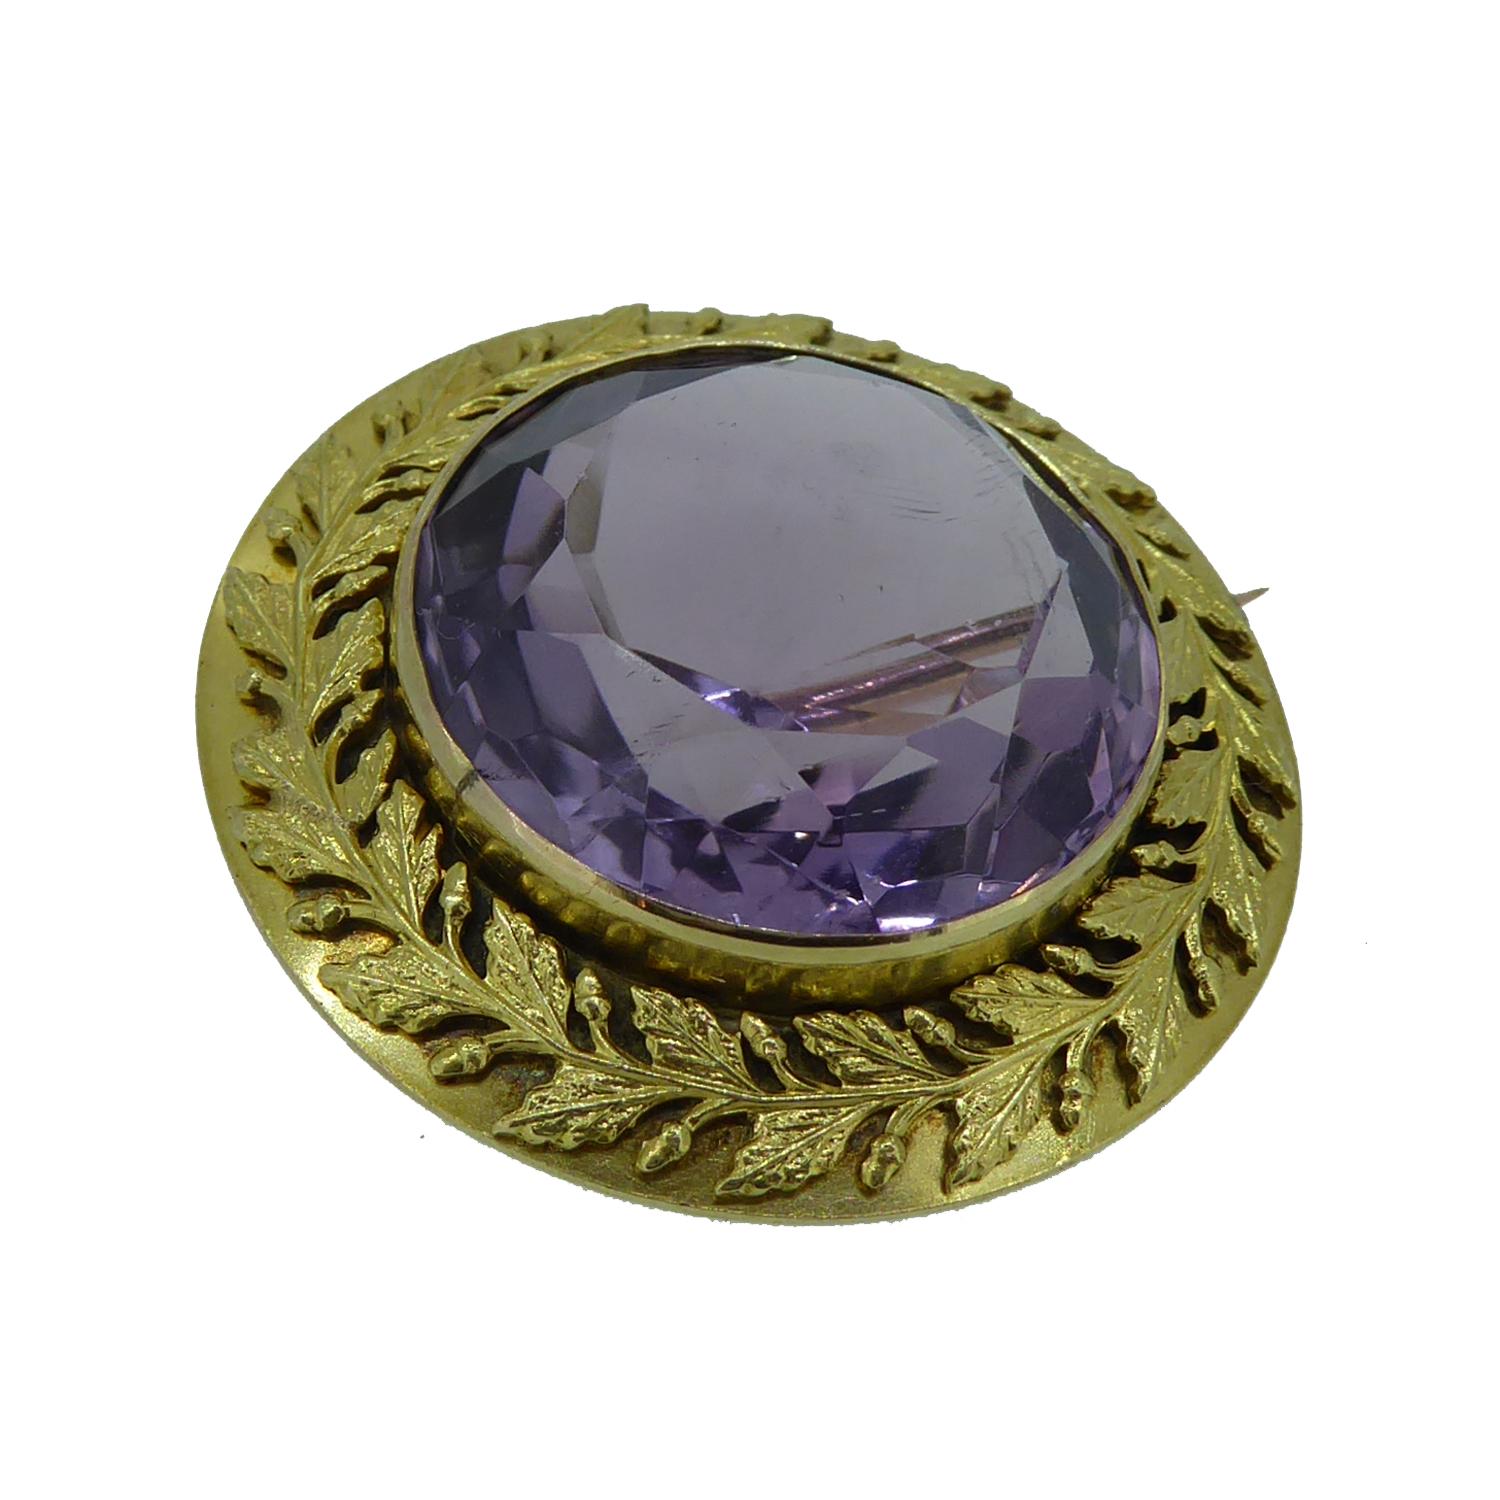 This antique brooch is set with a round faceted amethyst in a gold collar setting and measuring approx. 0.75